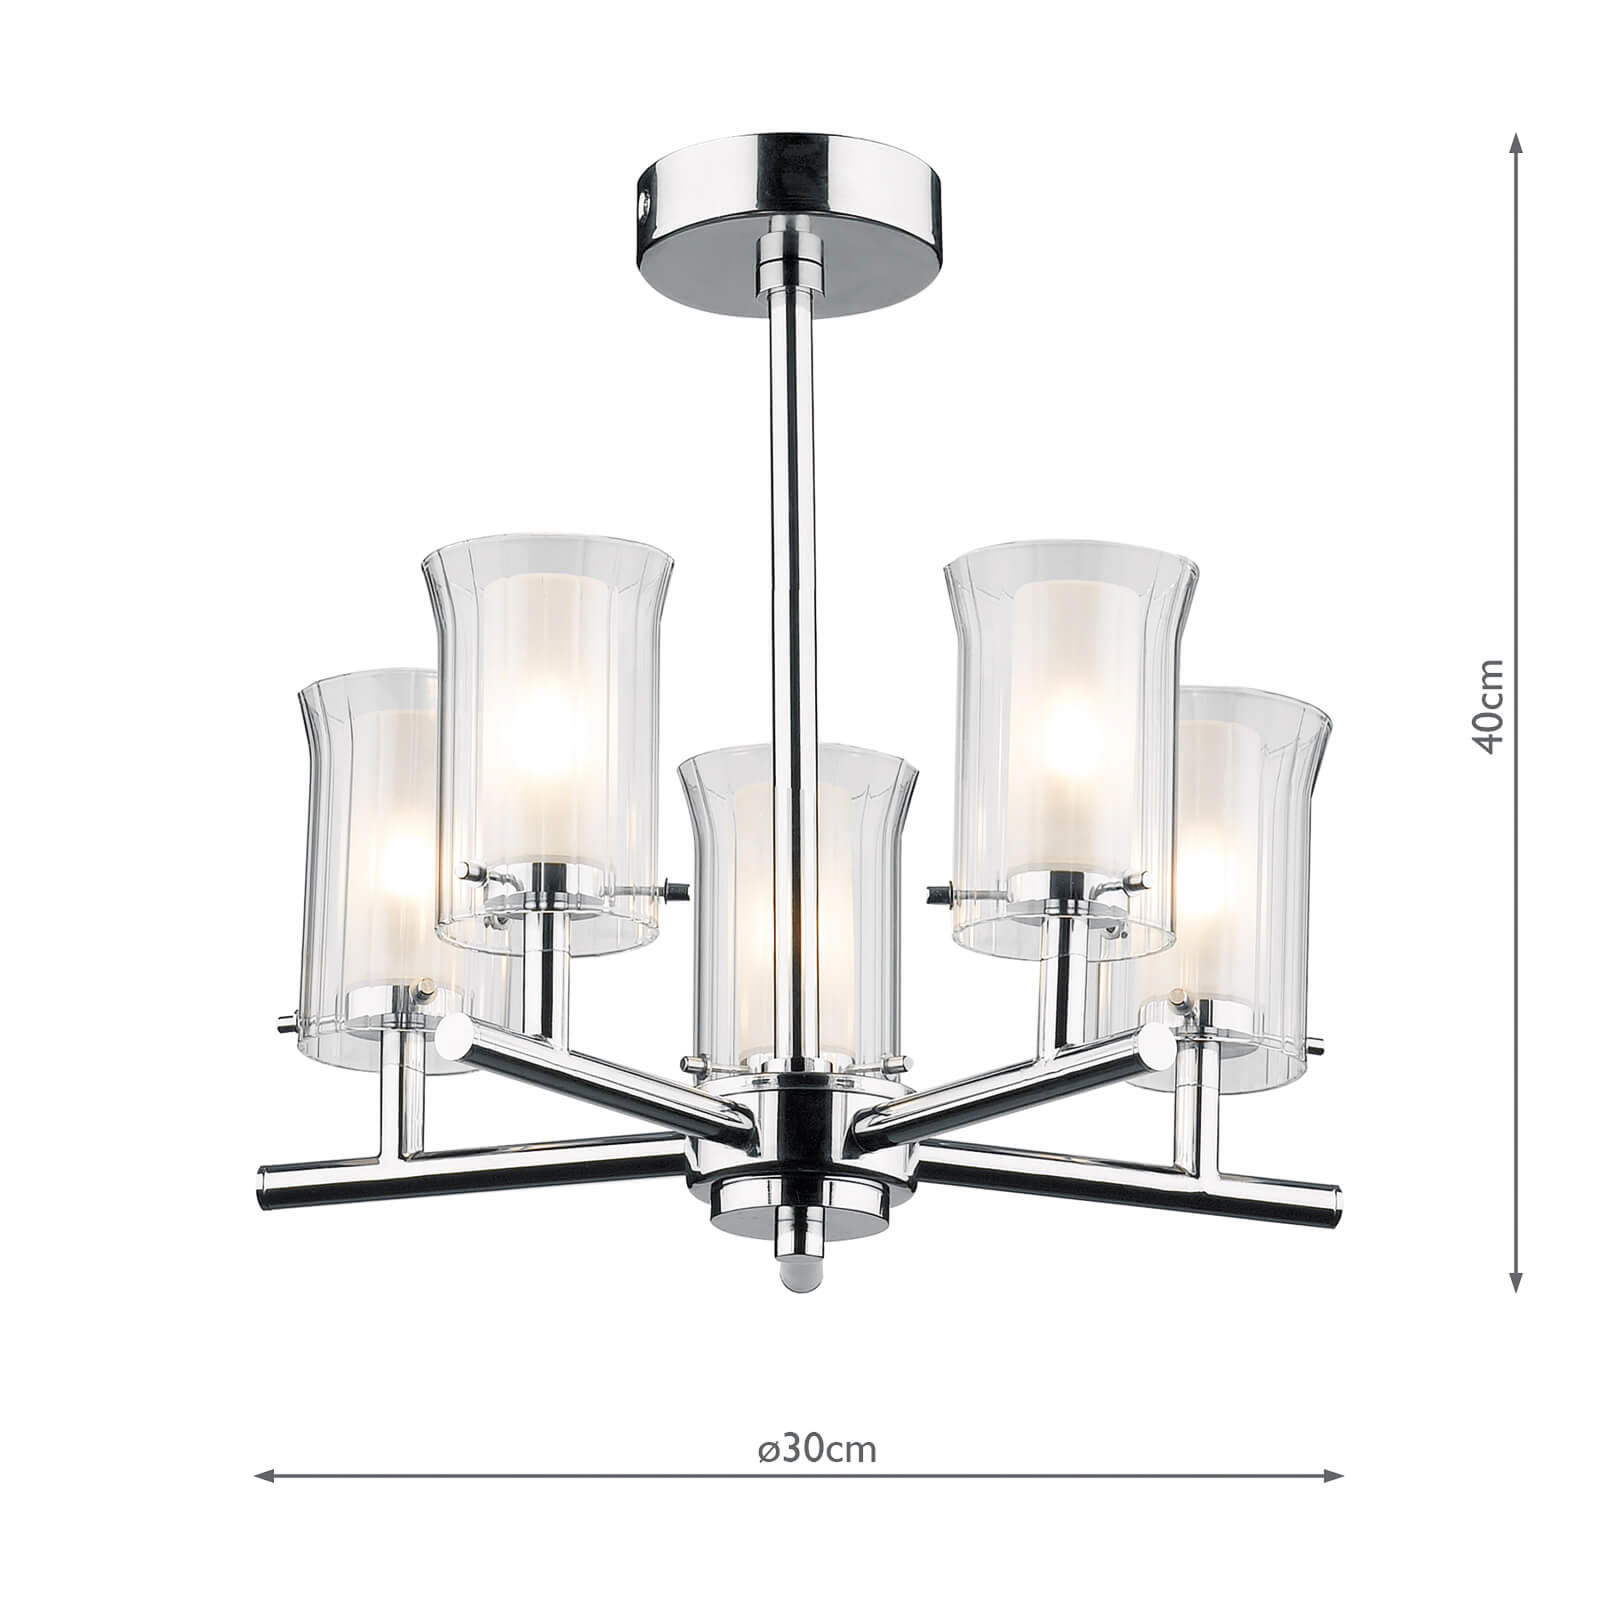 Elba ceiling light with five glass shades - IP44